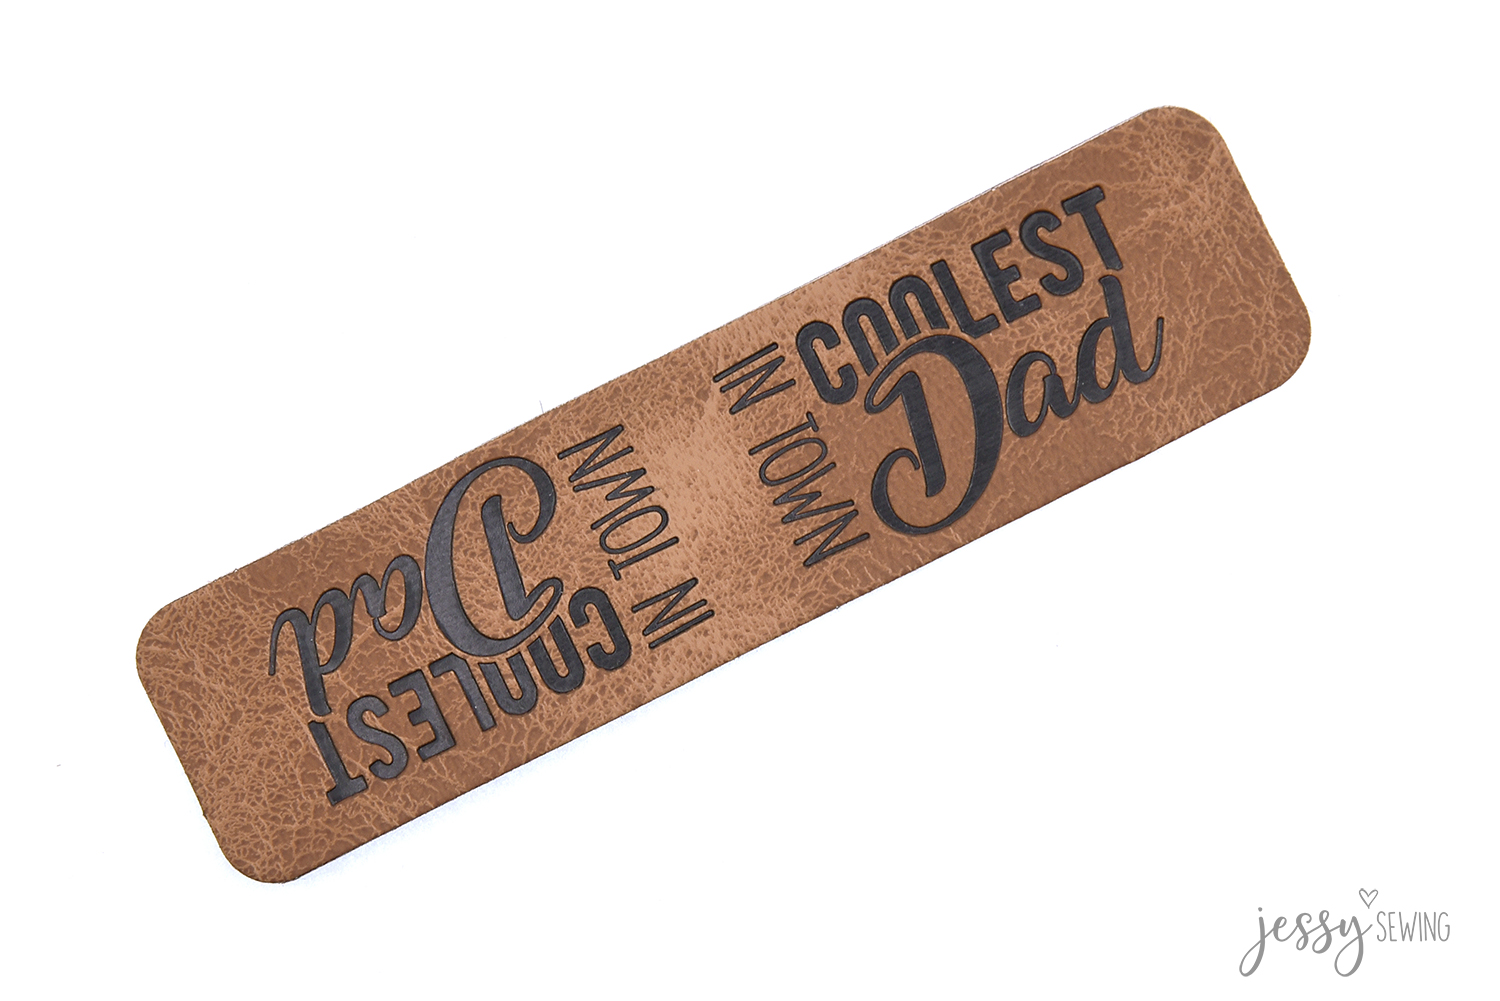 #43 Knick-Label "coolest Dad in town"